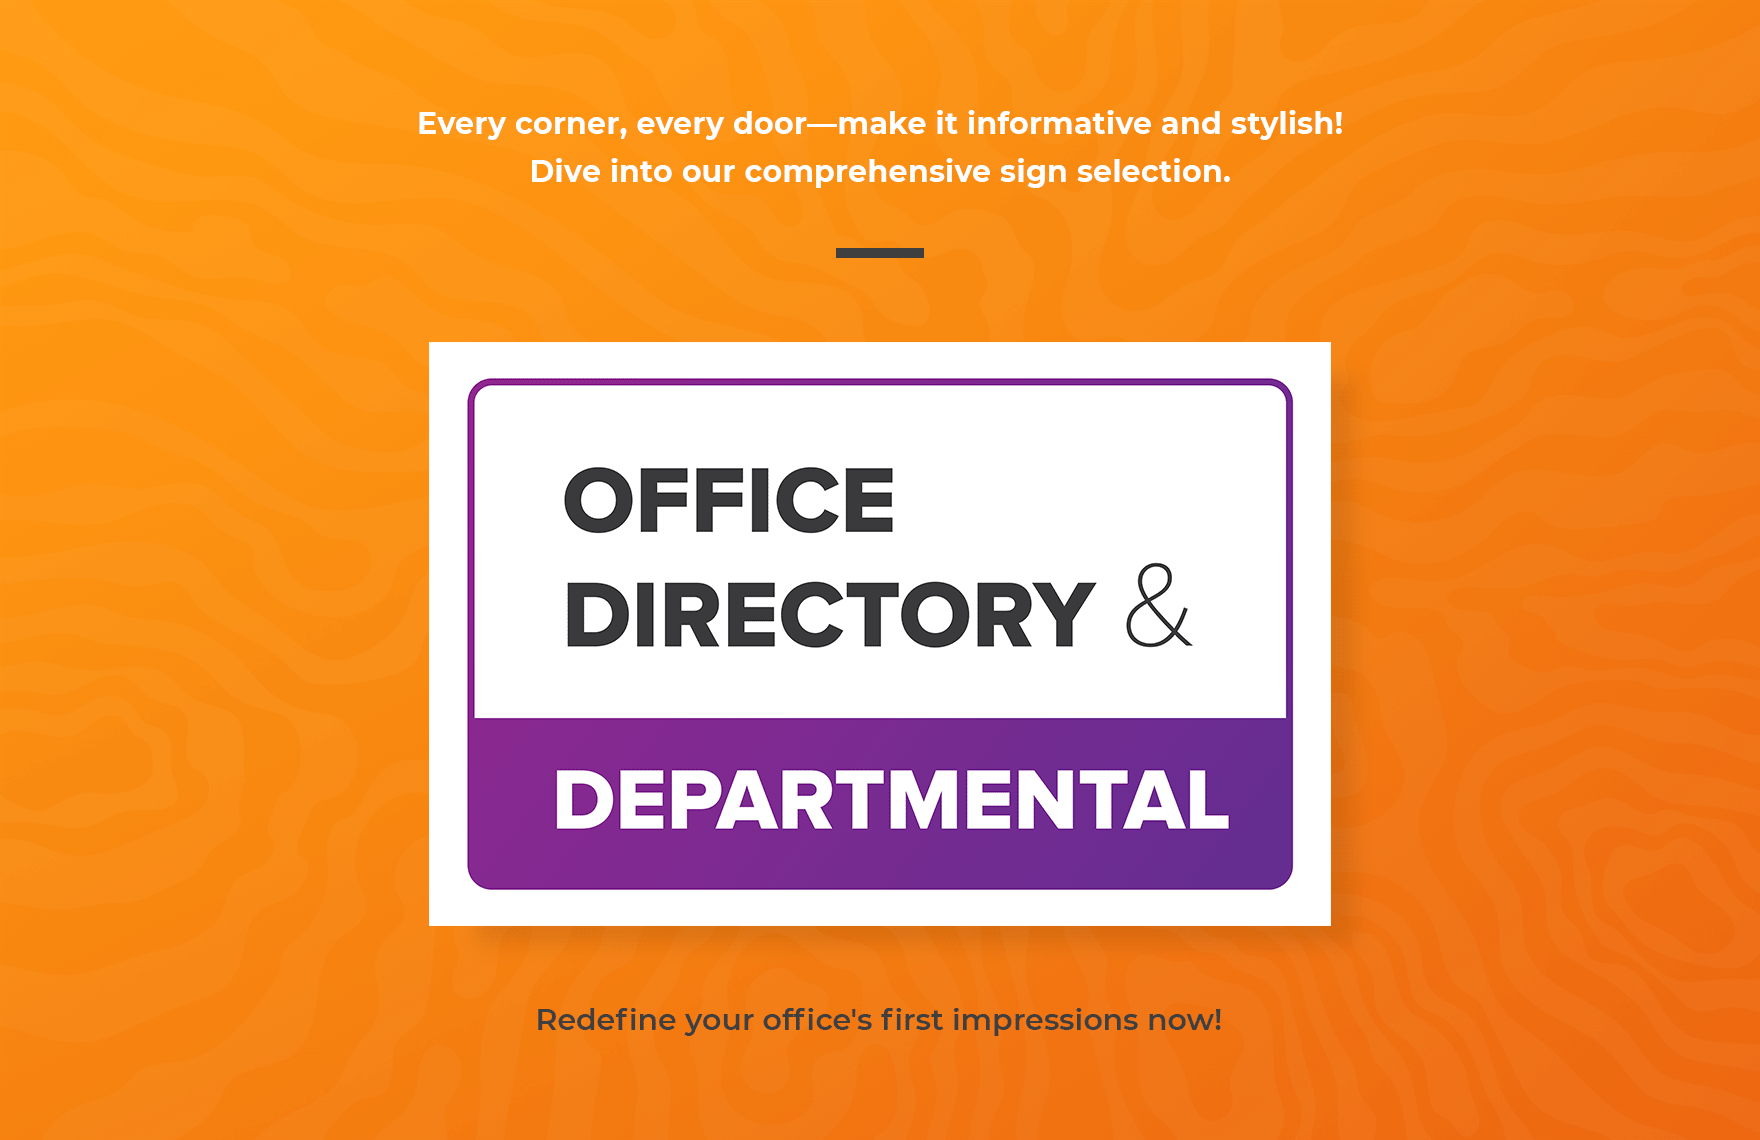 Office Directory and Departmental Sign Template